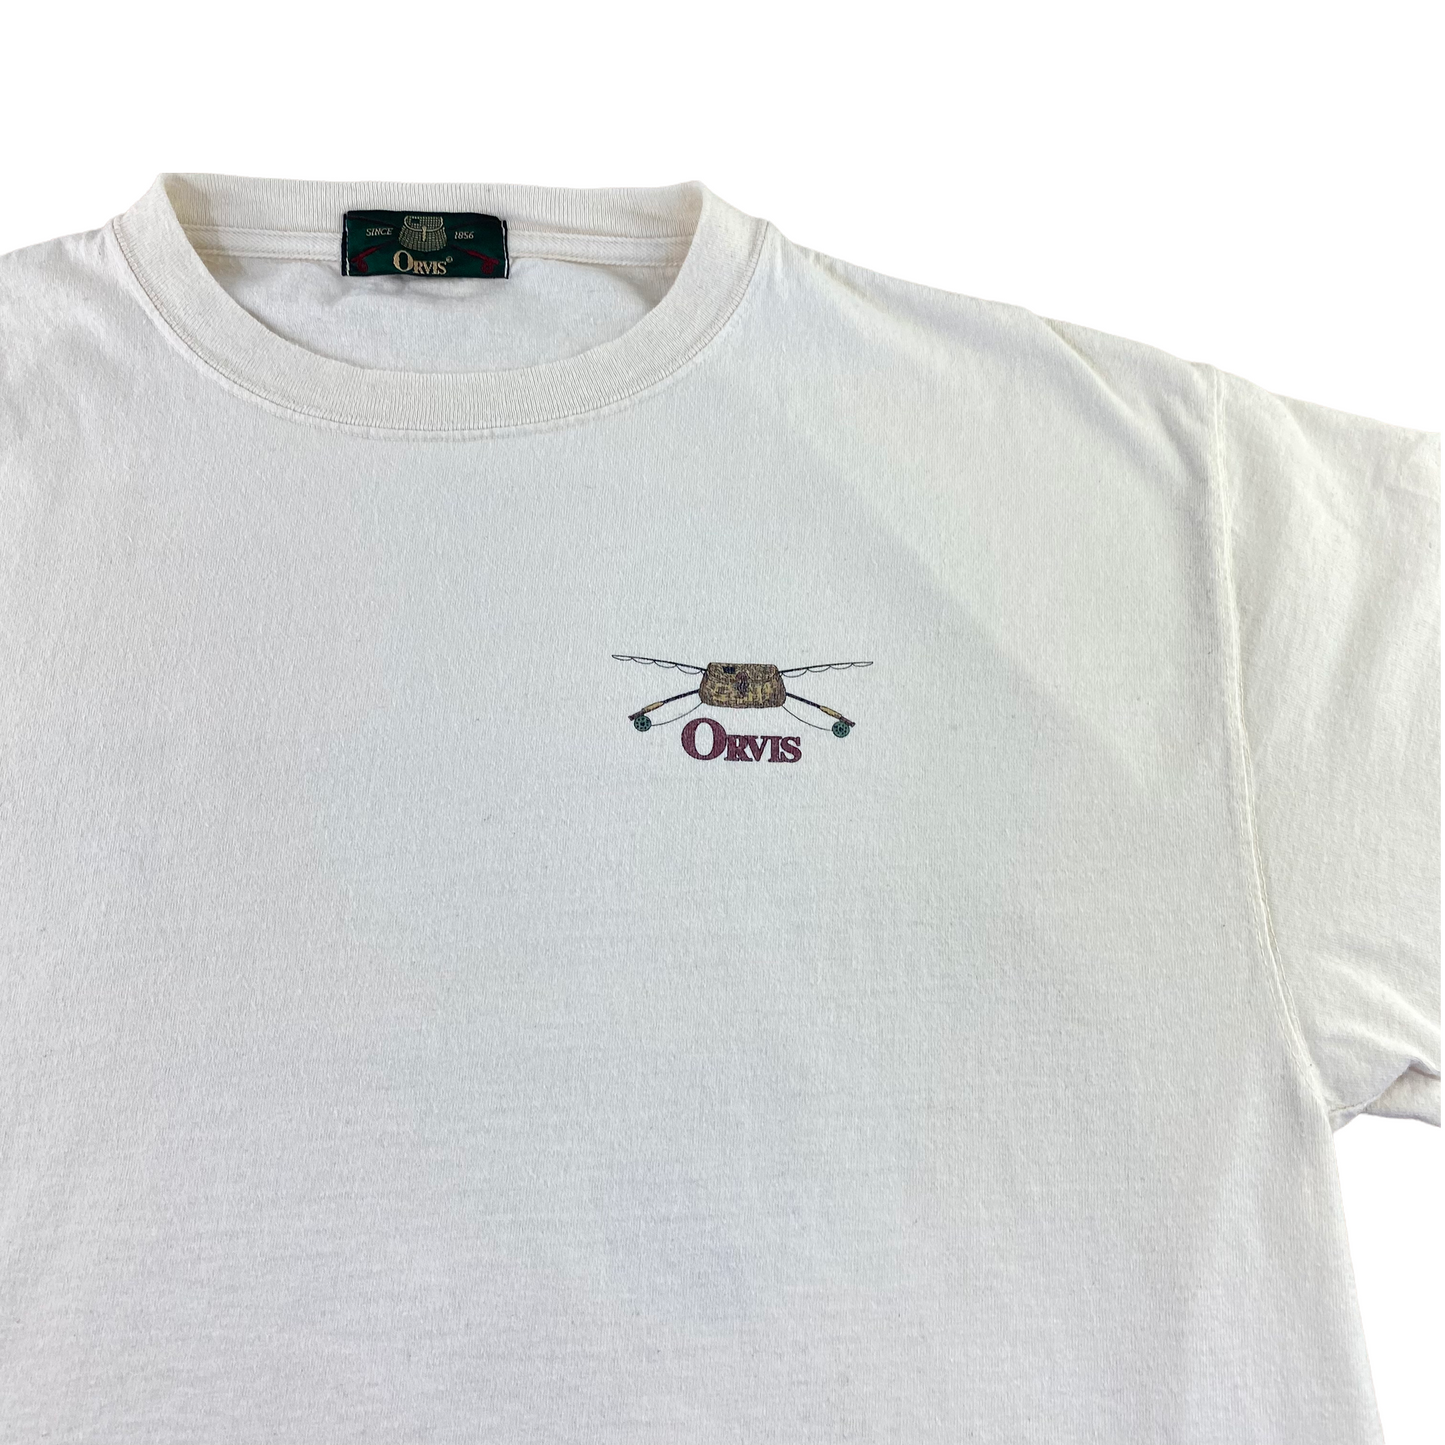 Orvis rod and reel tee XL